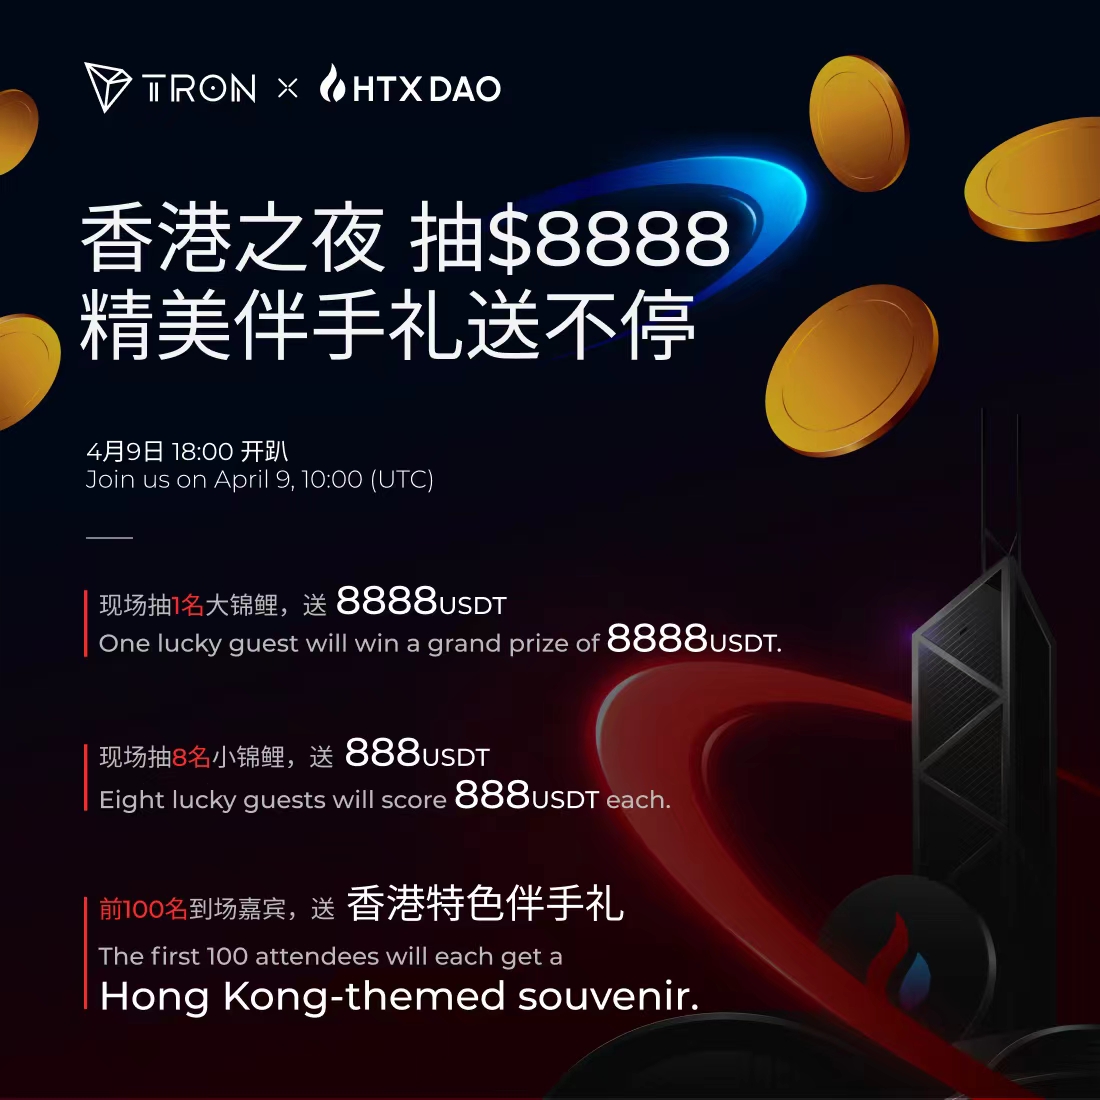 #HTXDAO X #TRON Hong Kong🇭🇰 Meetup ⏰ April 9, 10AM (UTC) 🎁Follow & RT for a chance to win big #rewards and souvenirs at the party! Don't miss out! See you in #HongKong!